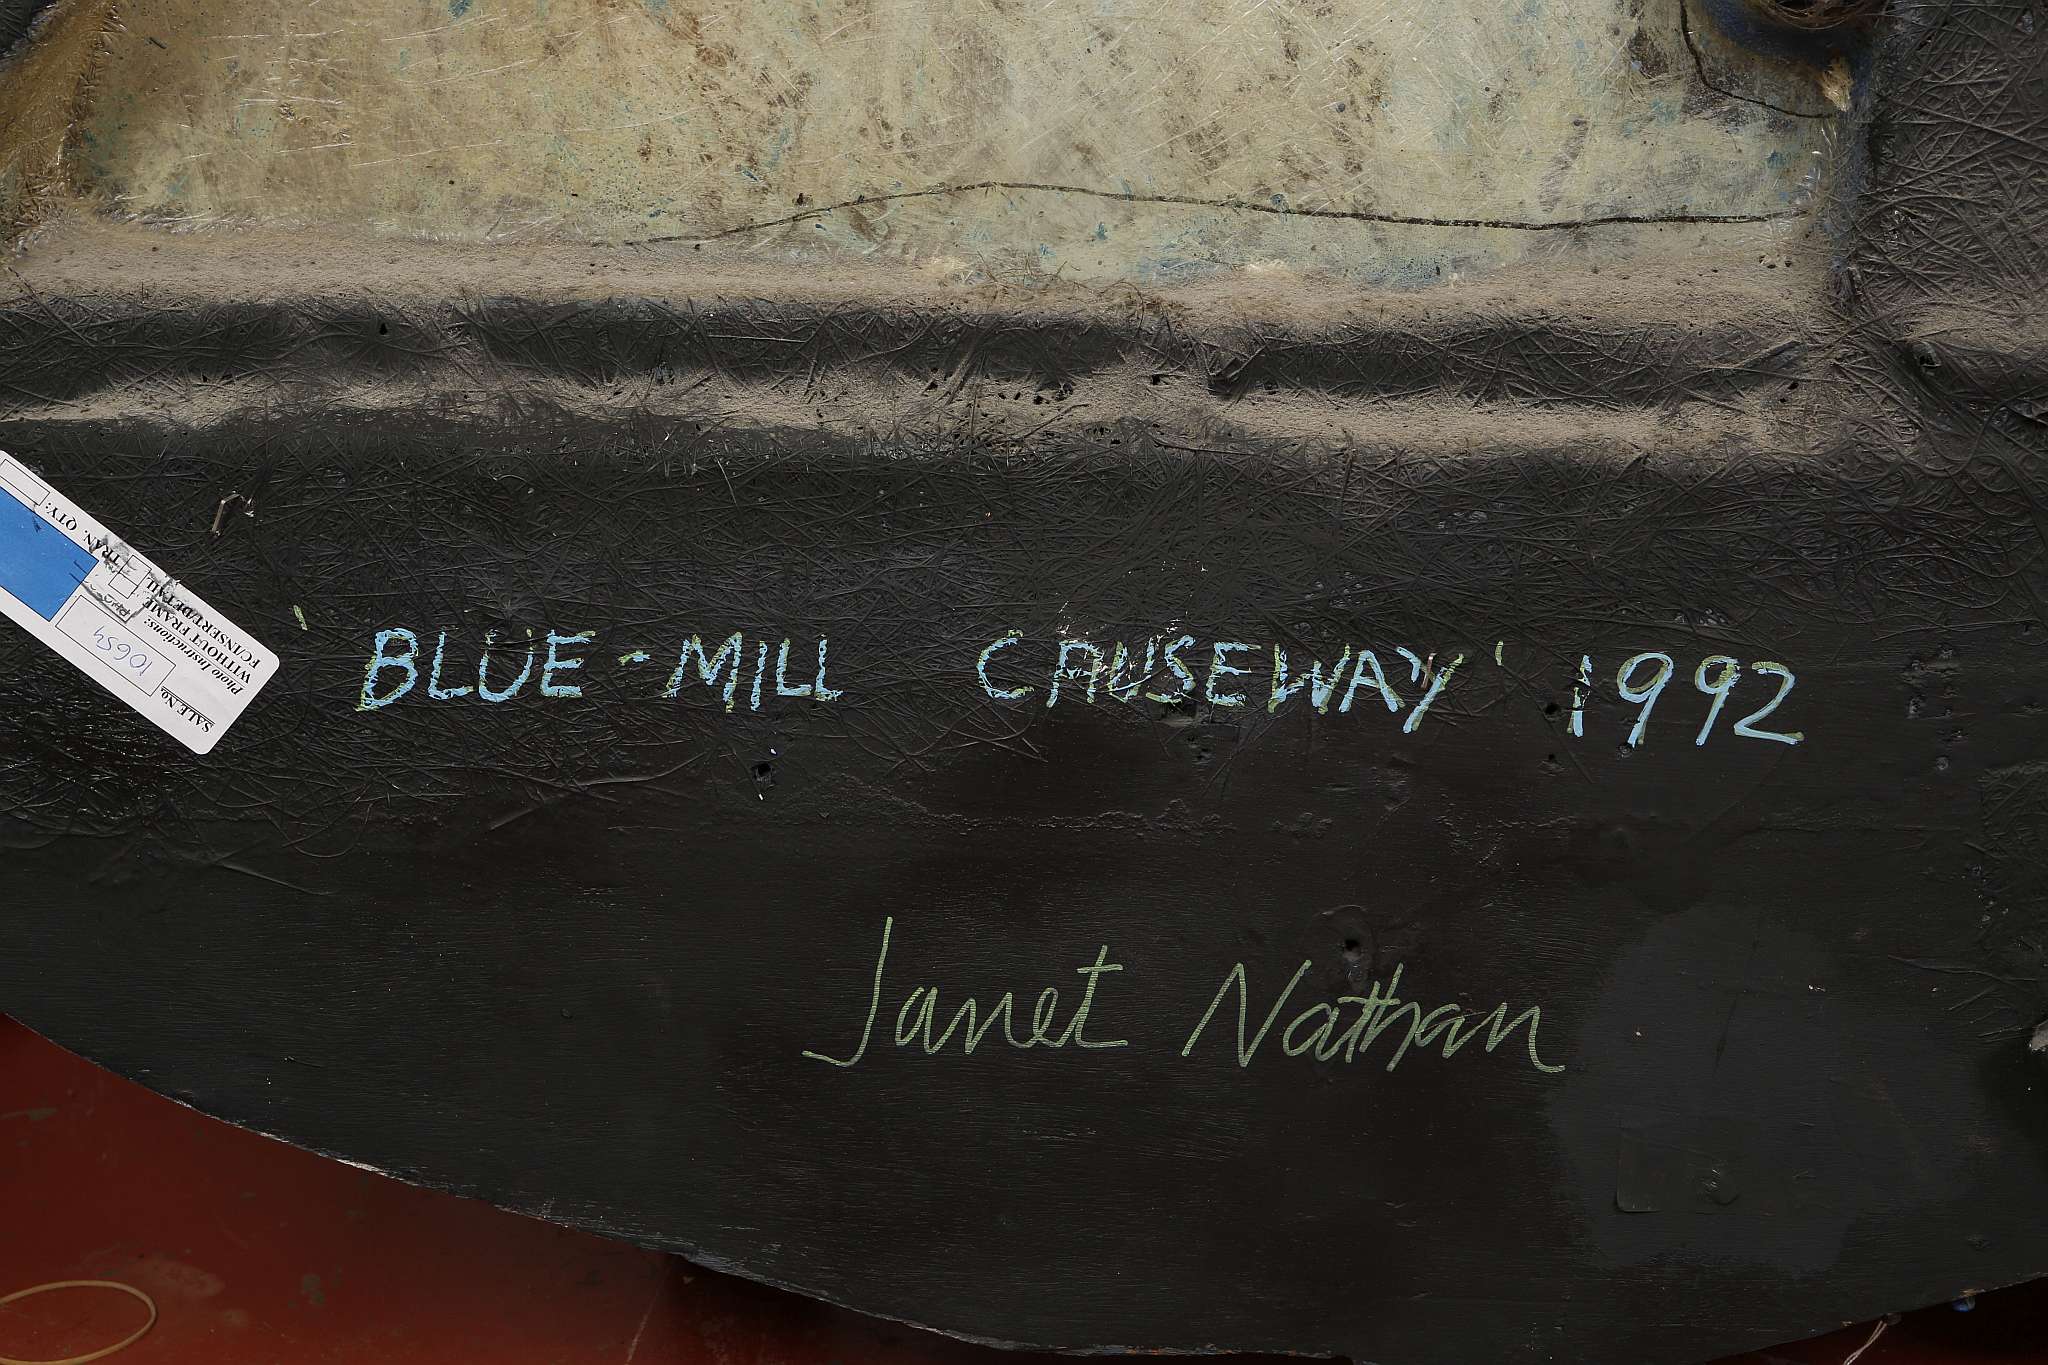 Janet Nathan b.1933 “Blue Mill Causeway” Mixed media on wood. 236.3cm x 114.3cm - Image 5 of 5